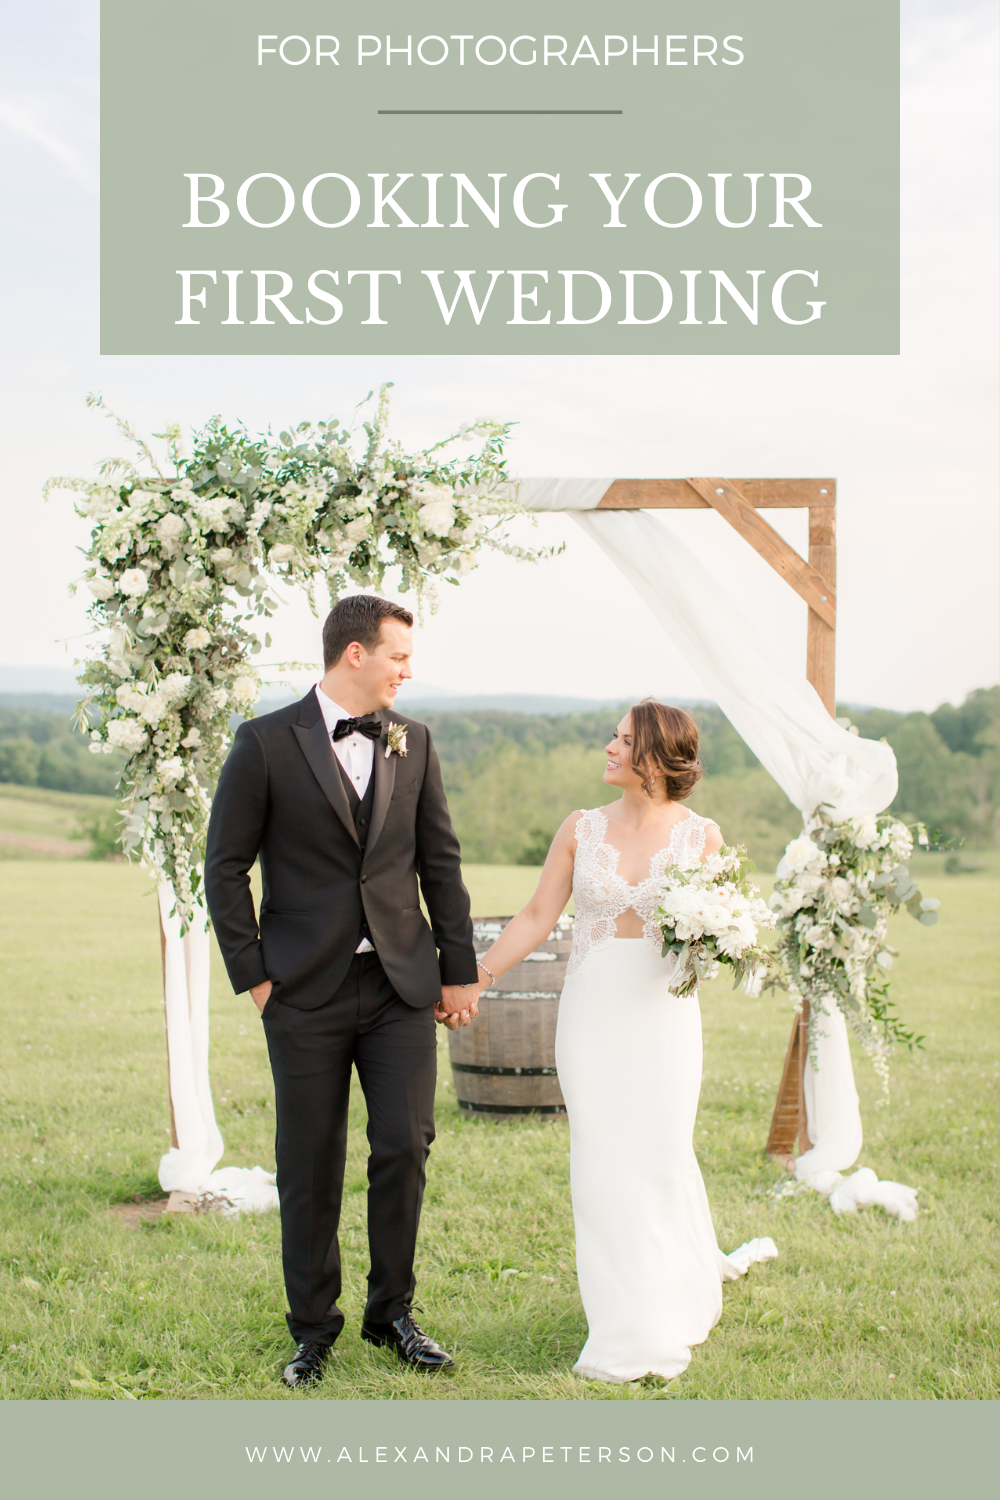 Tips to Book Your First Wedding